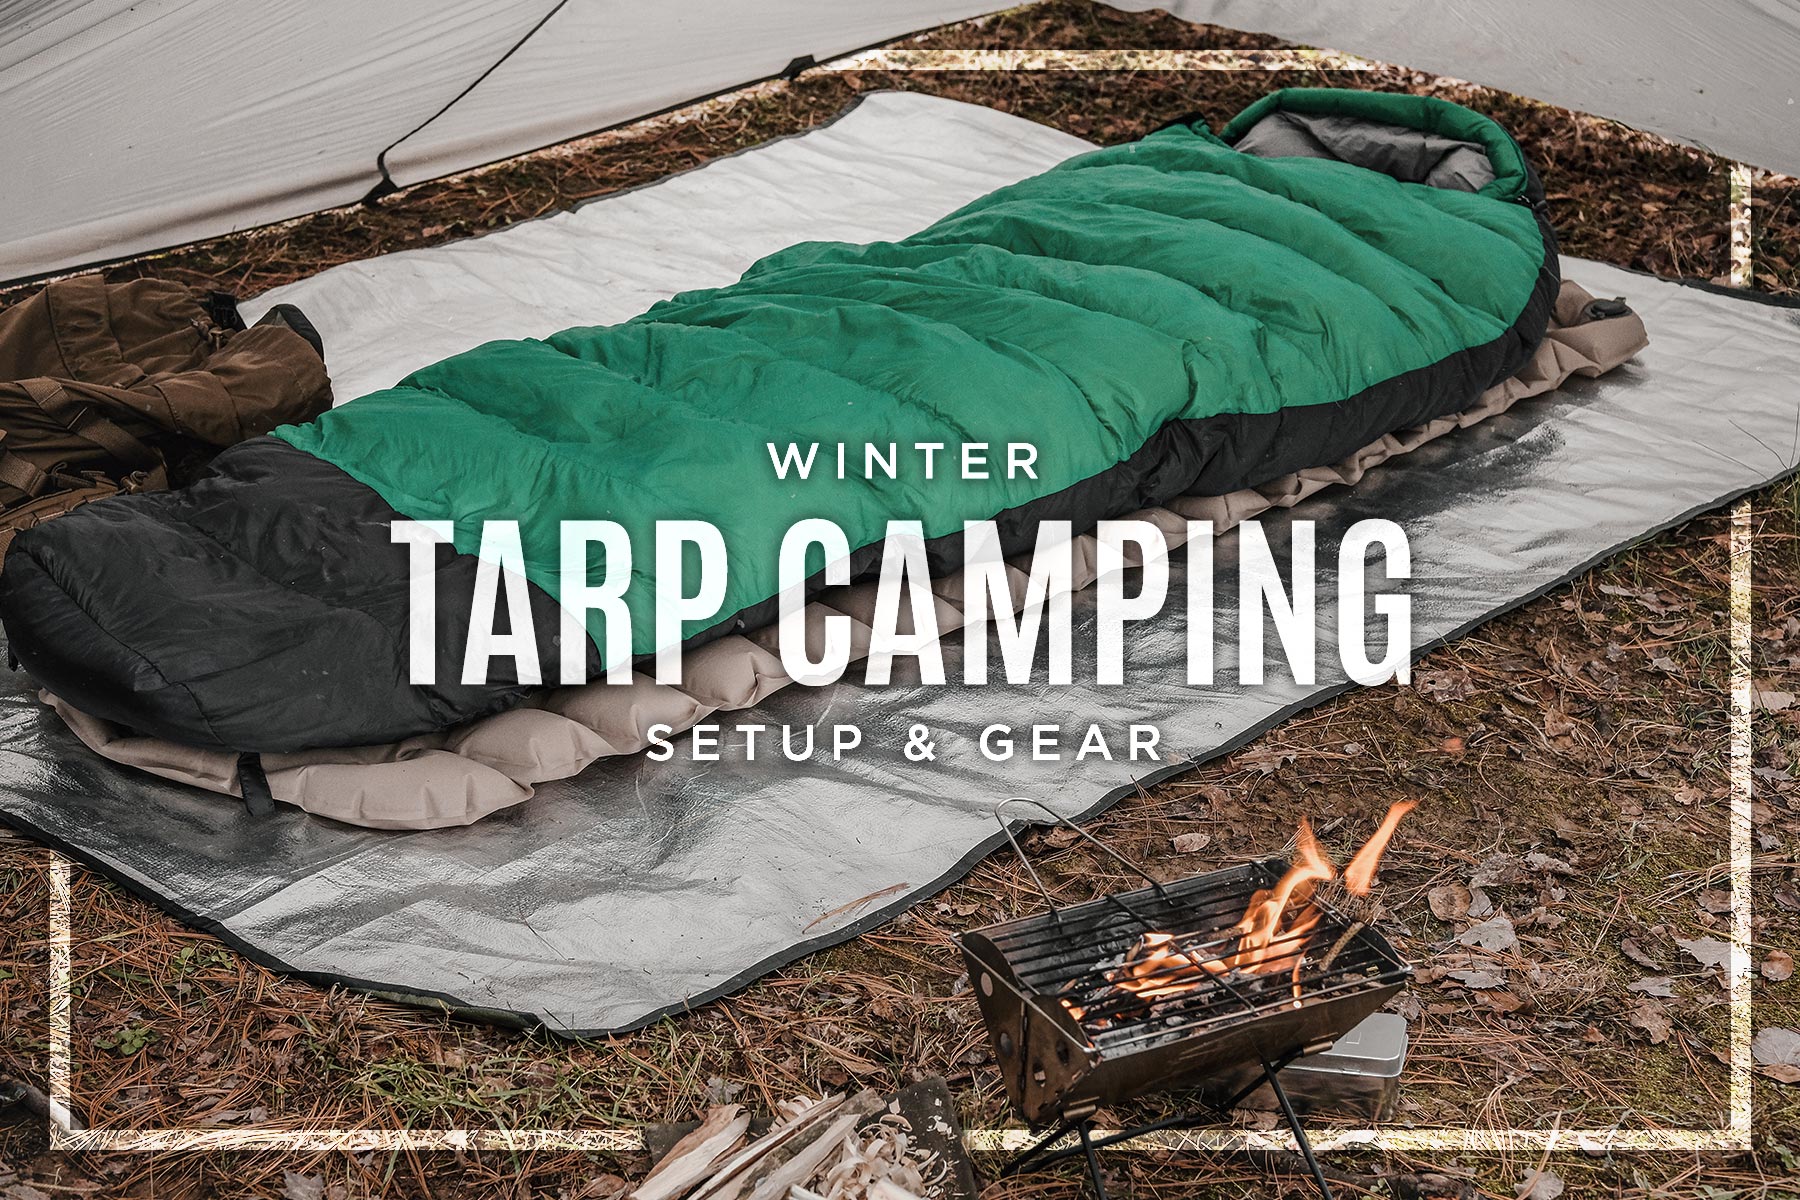 Winter Camping Setup • The best gear from ground up!